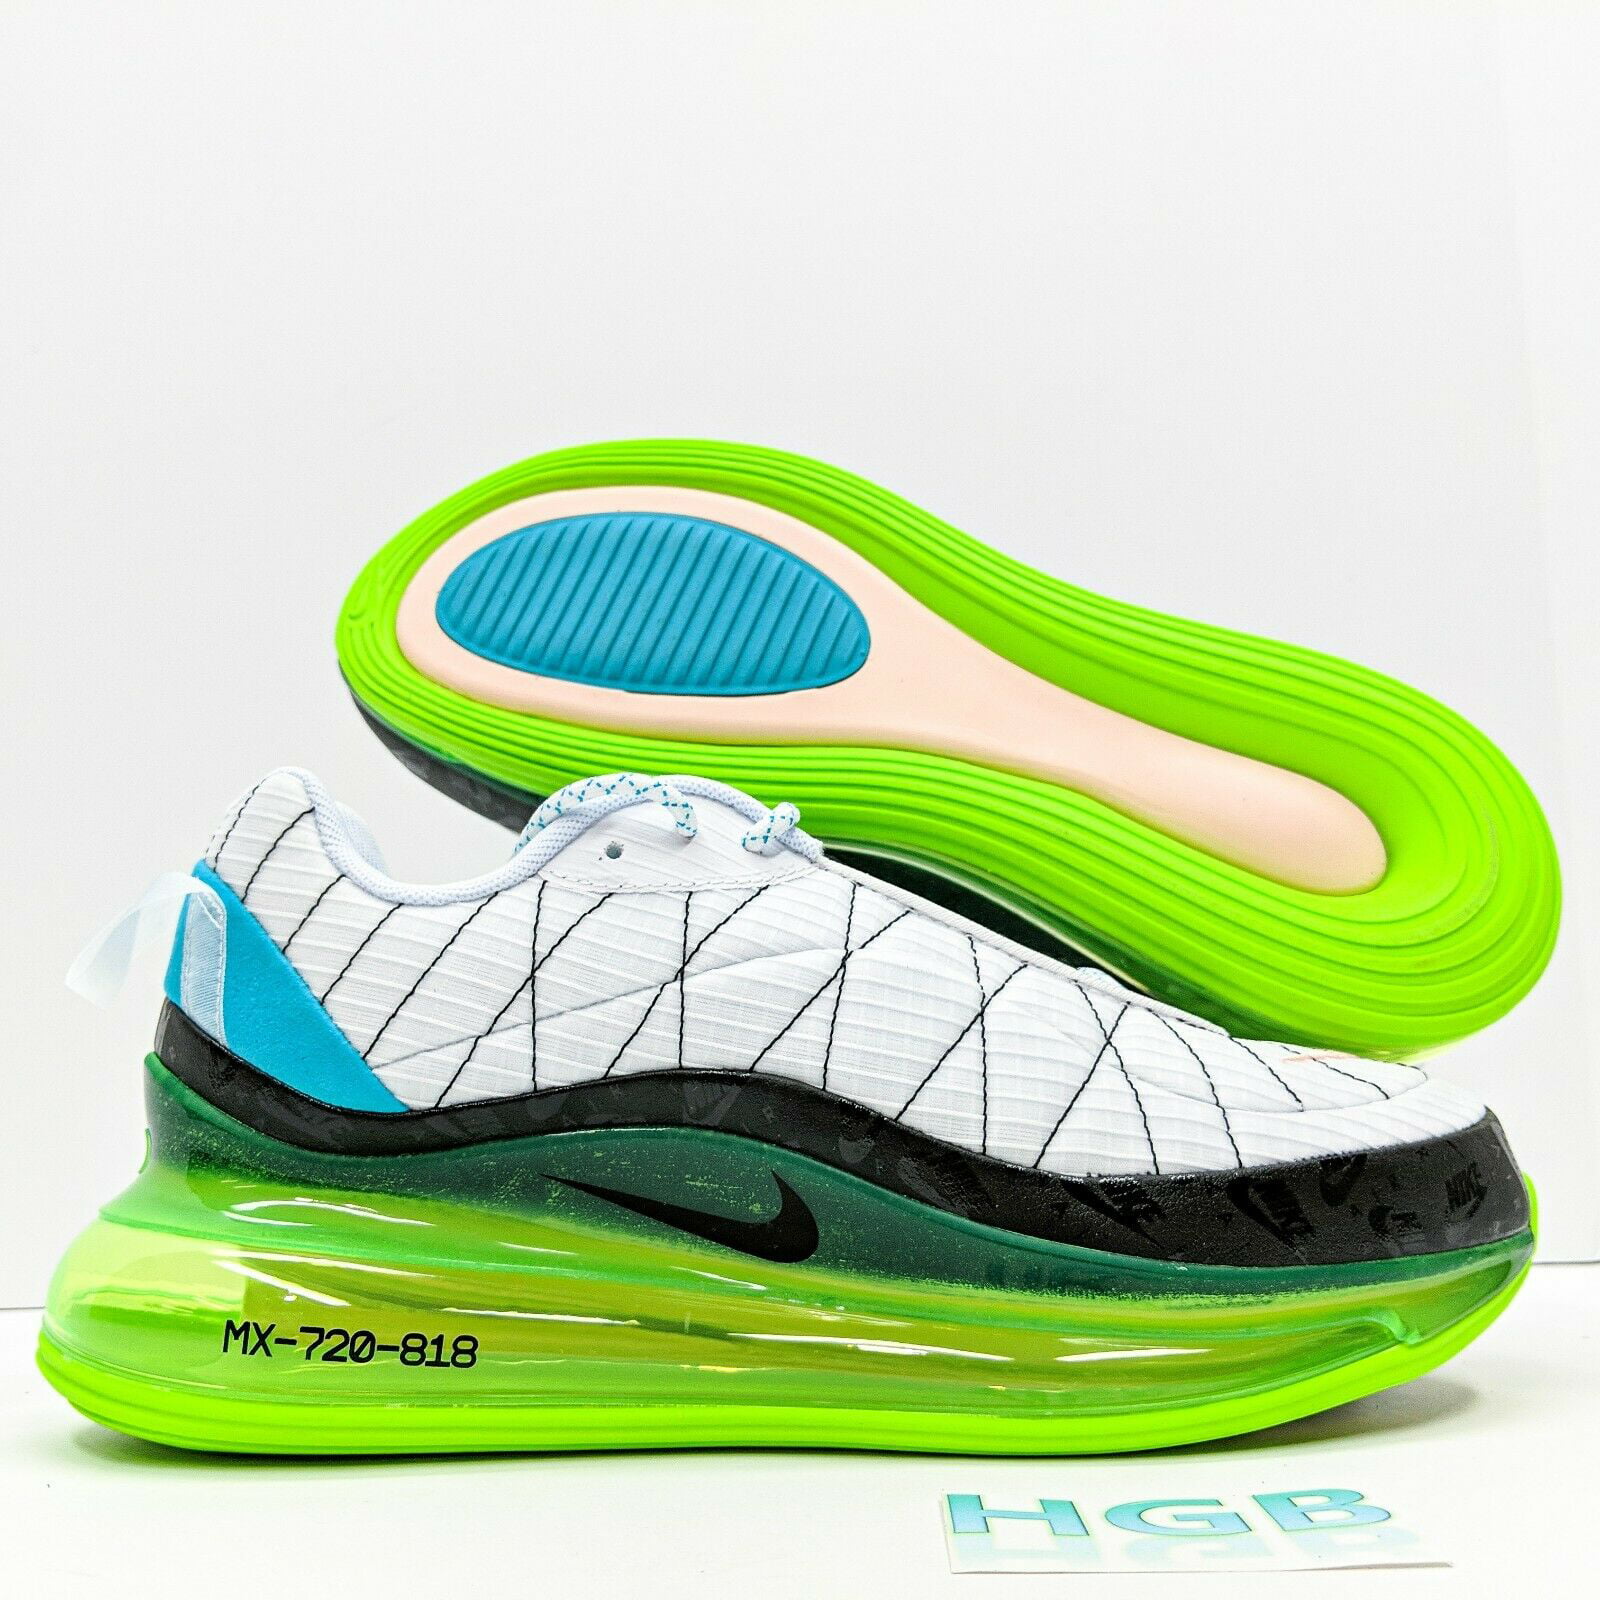 Nike Air Mx 720 818 Trainers in Green for Men